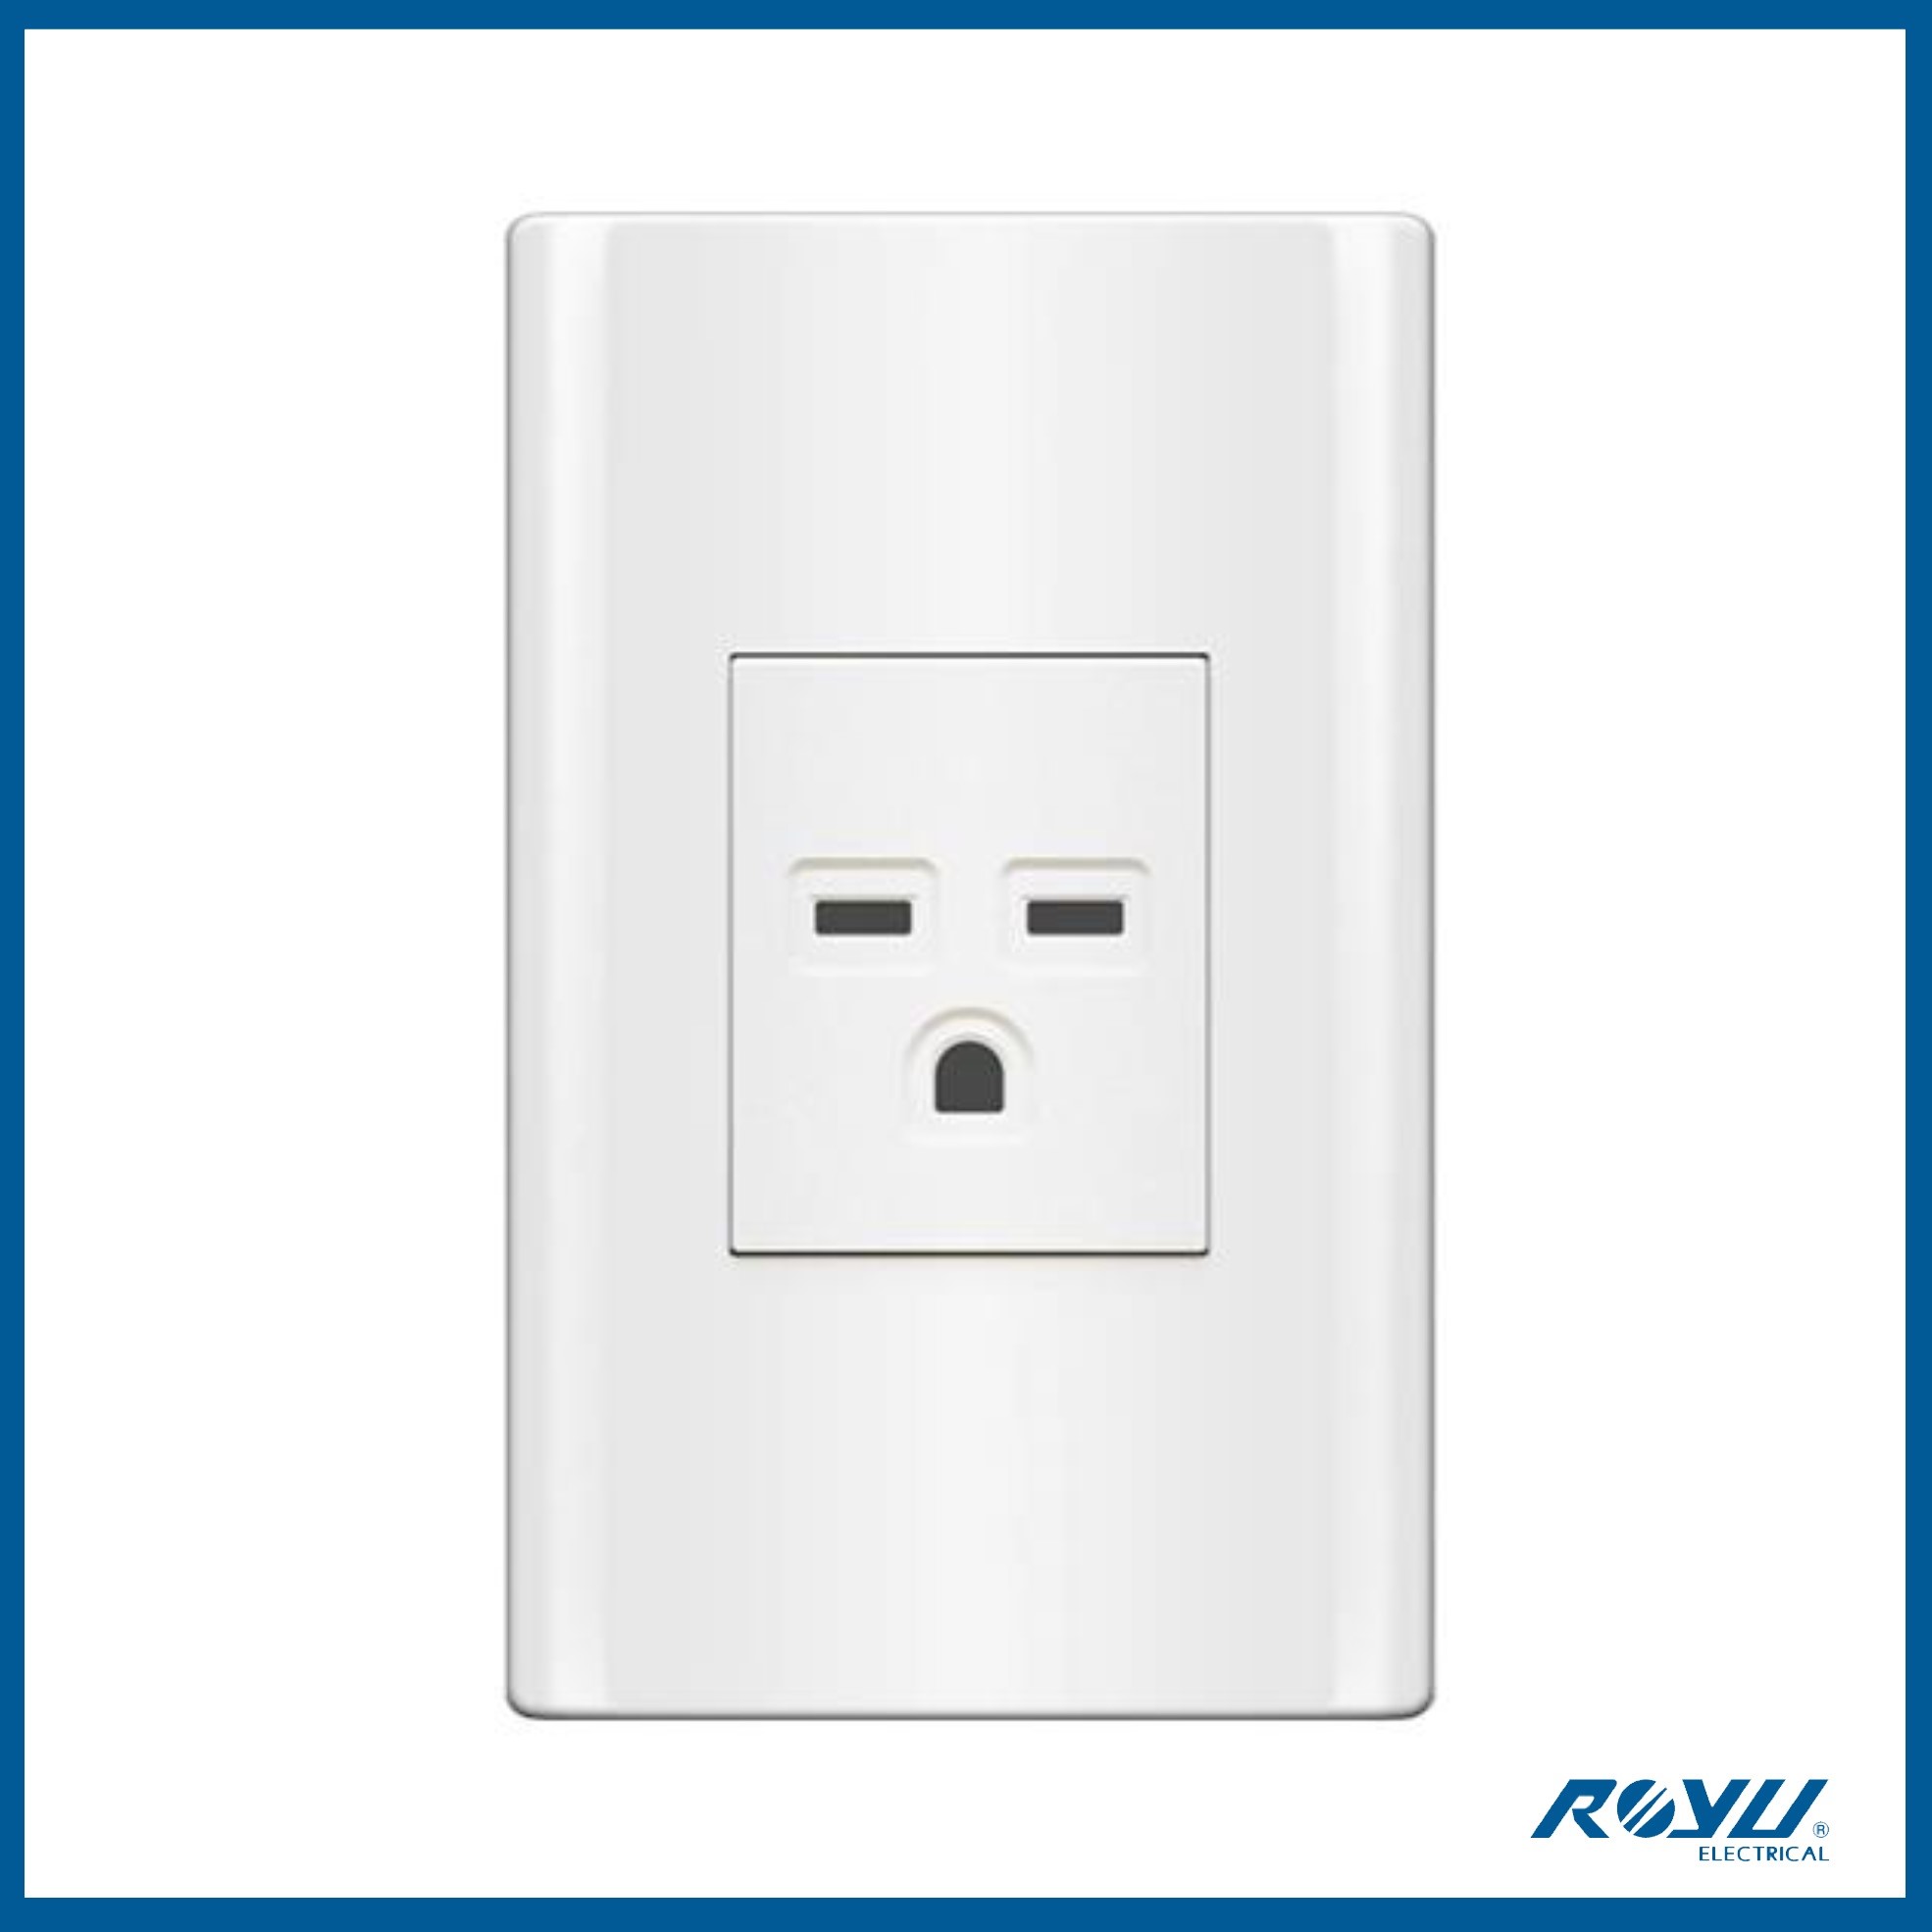 ROYU Plano Series White Set Outlets - 2 Gang Outlet Set MDS113, 3 Gang ...